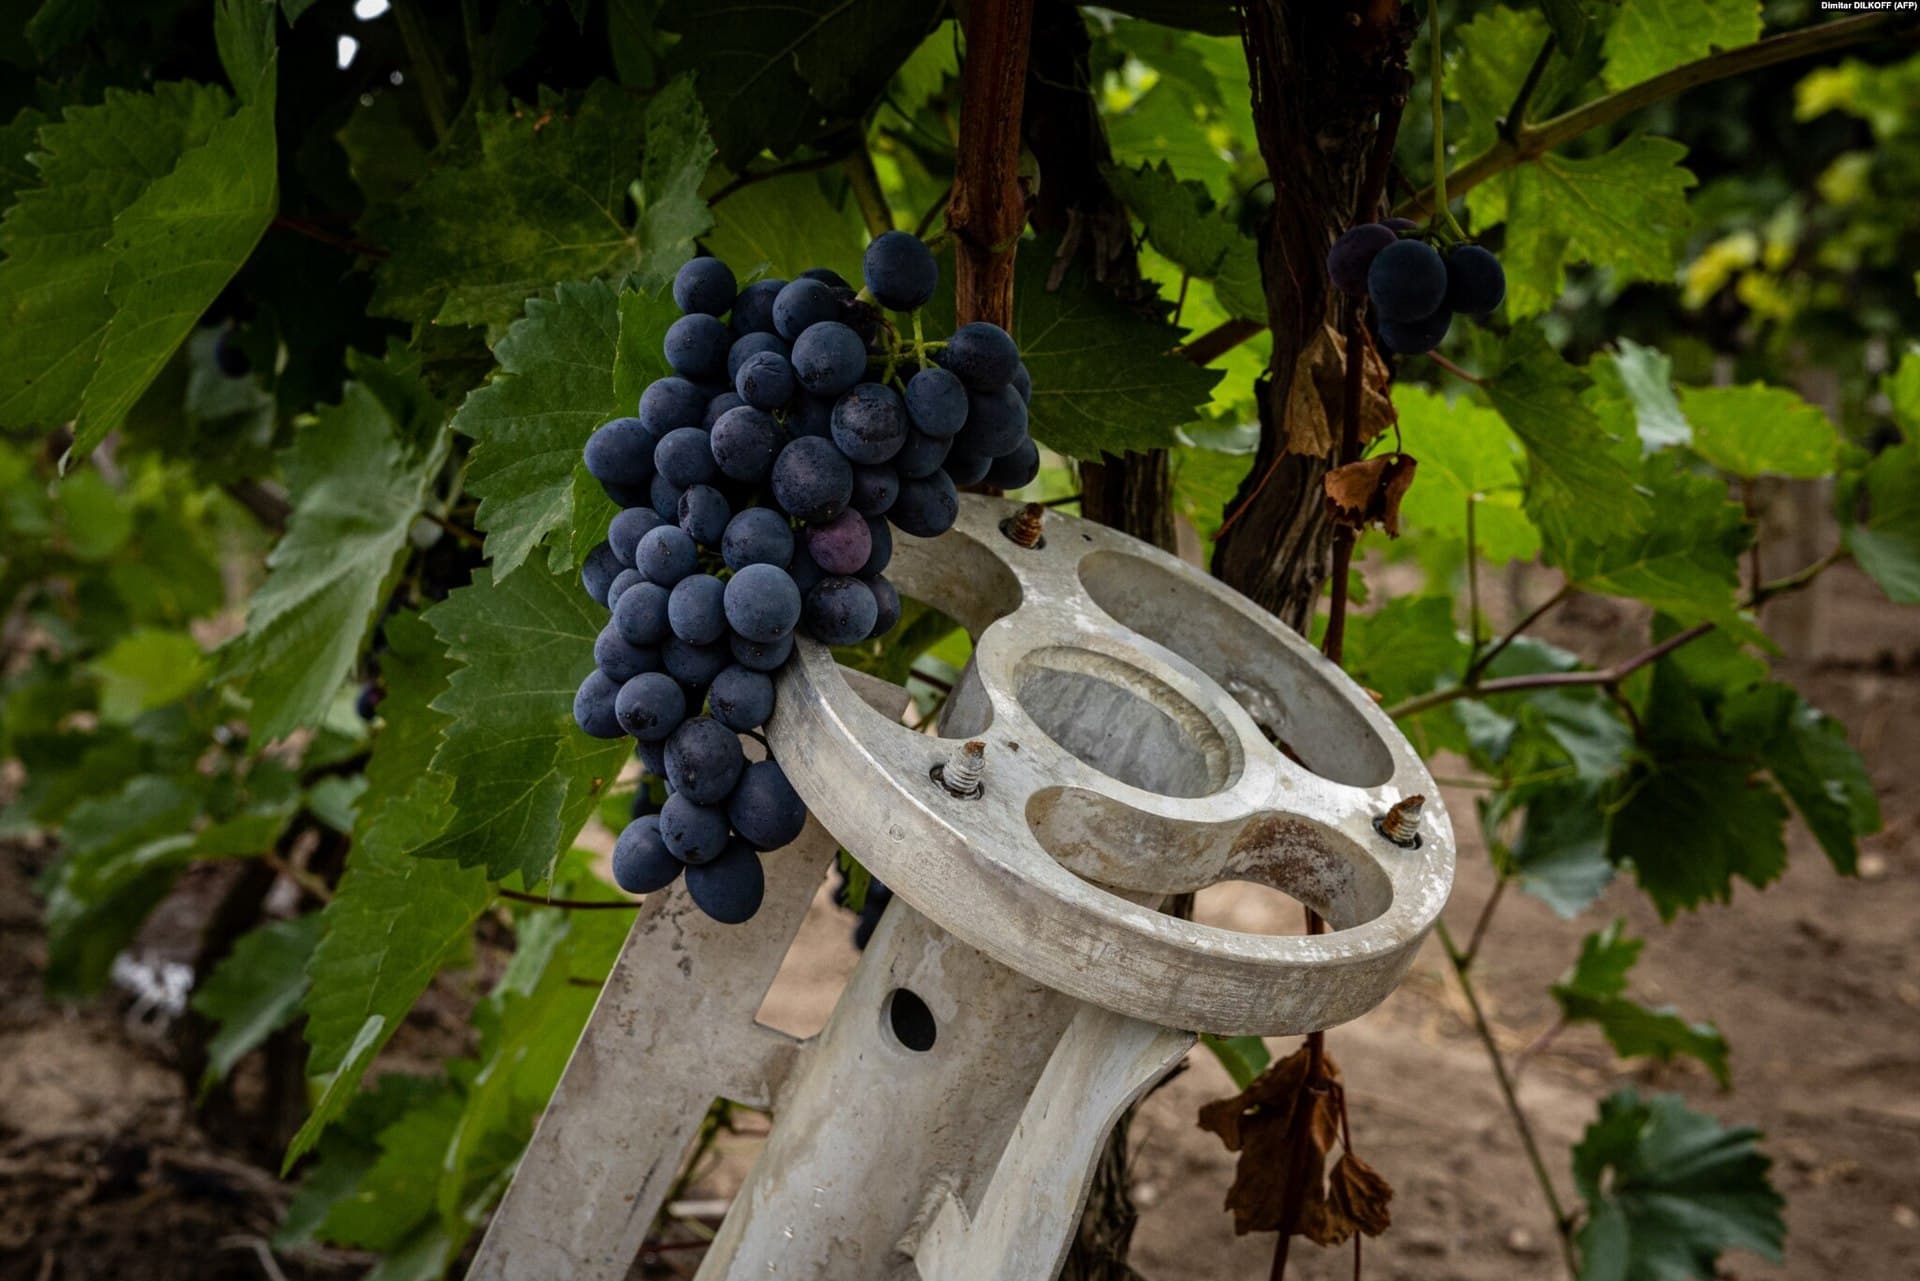 At the Olvio Nuvo vineyard in Mykolayiv region workers must dodge the cluster munitions that are strewn throughout the fields while picking grapes